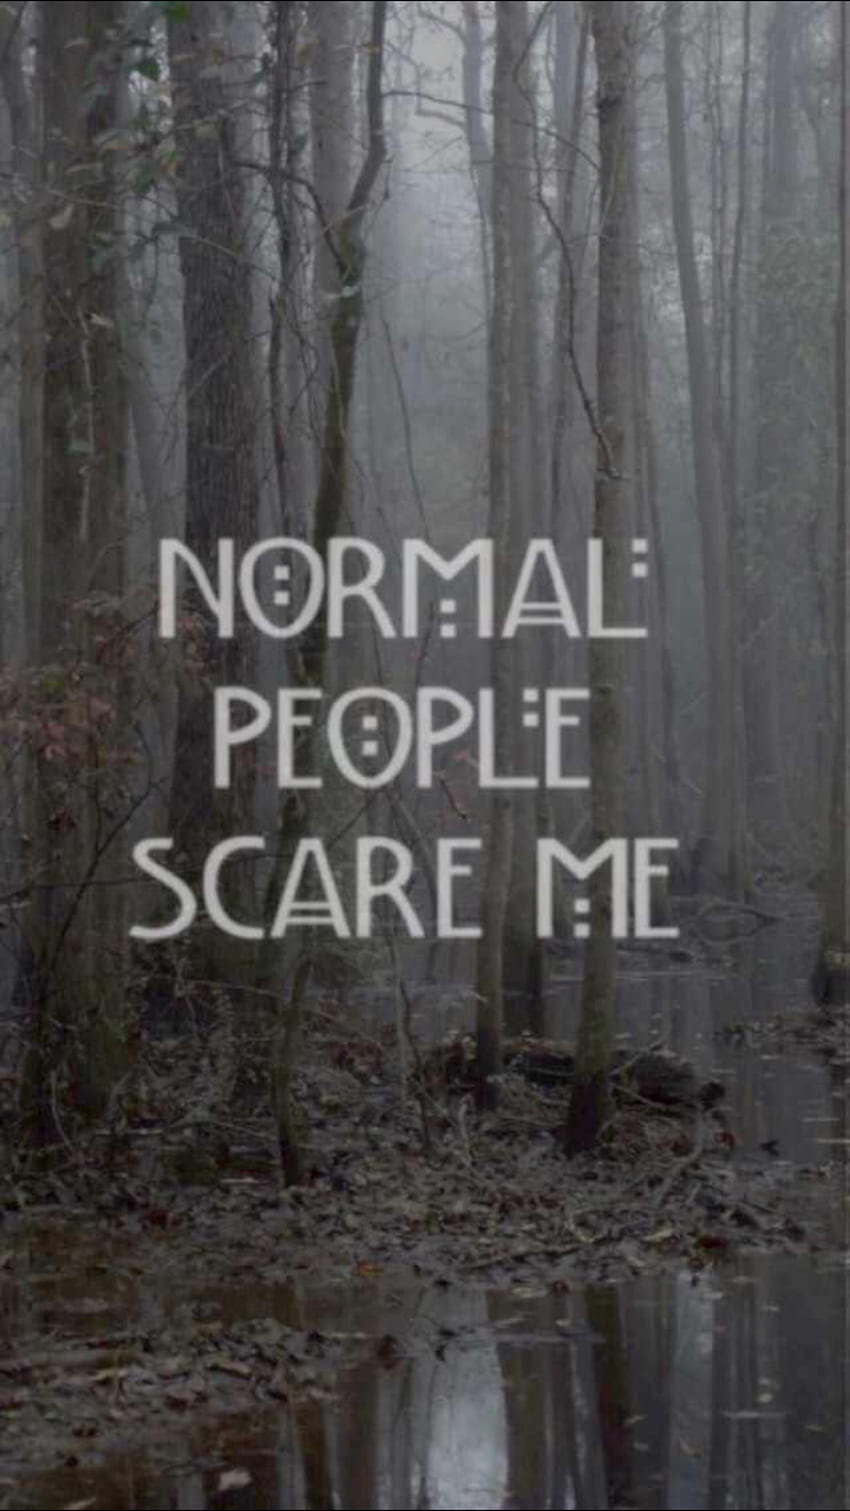 about in AHS, Normal People Scare Me HD phone wallpaper